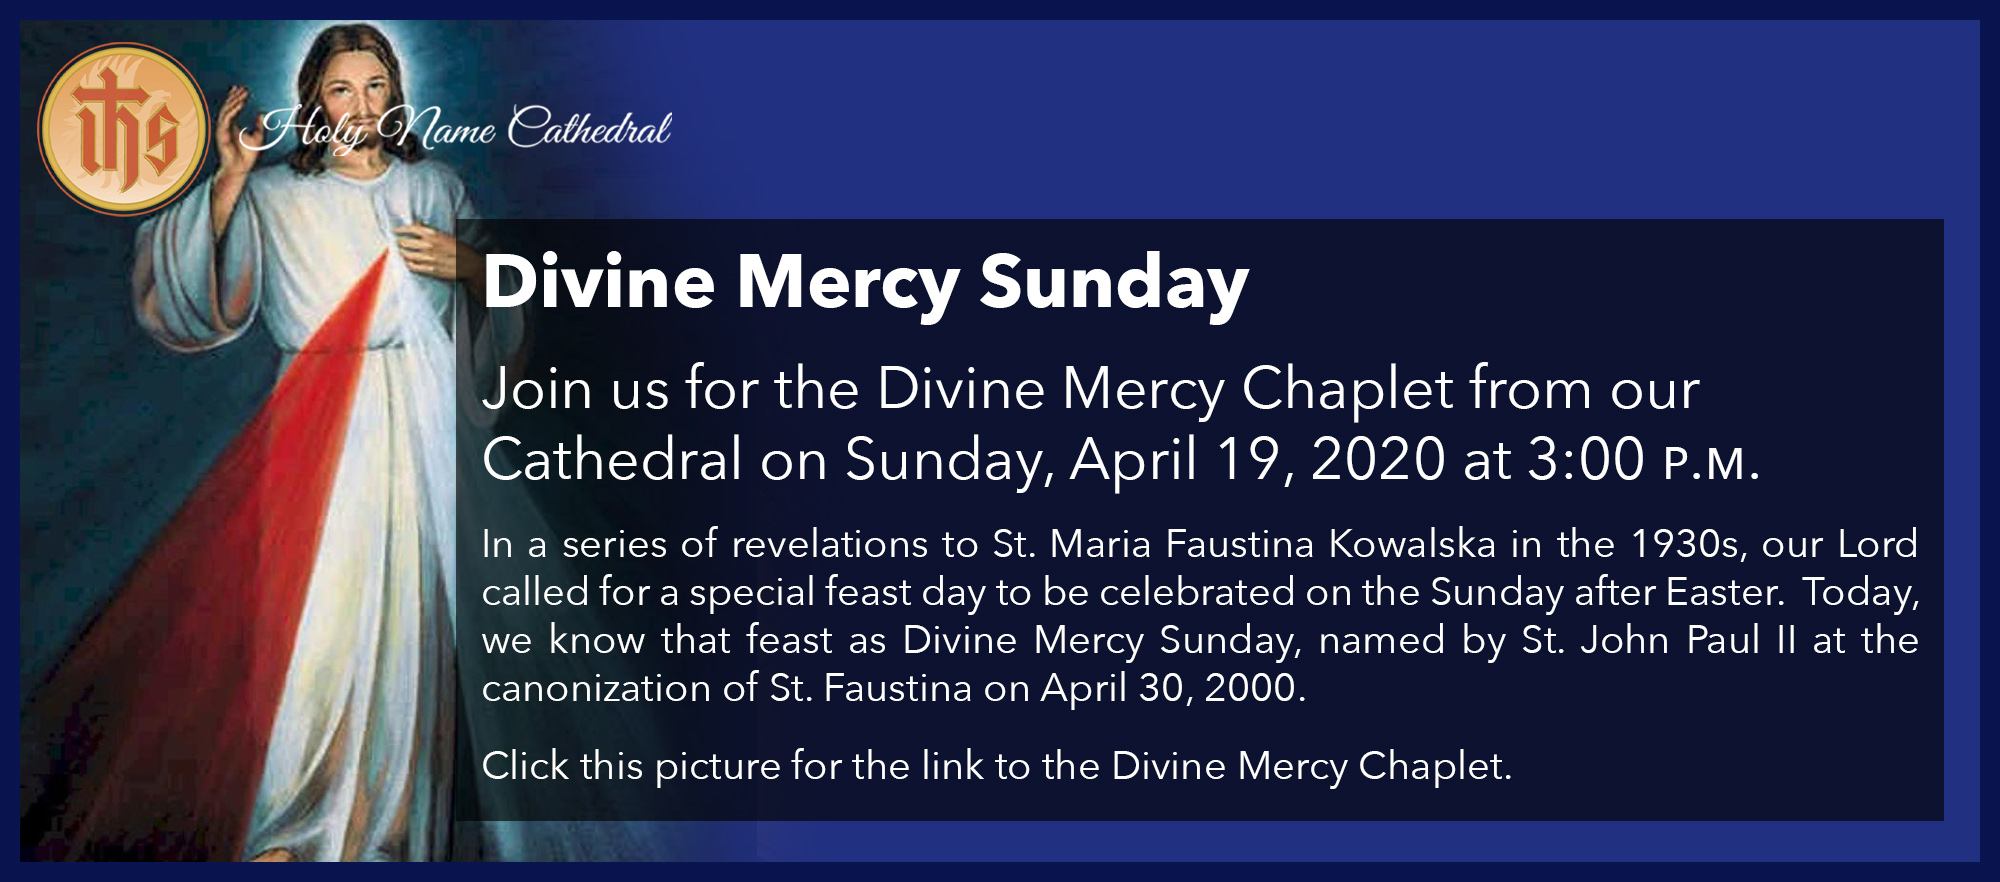 Divine Mercy Sunday - 2020 | Holy Name Cathedral Parish Holy Name